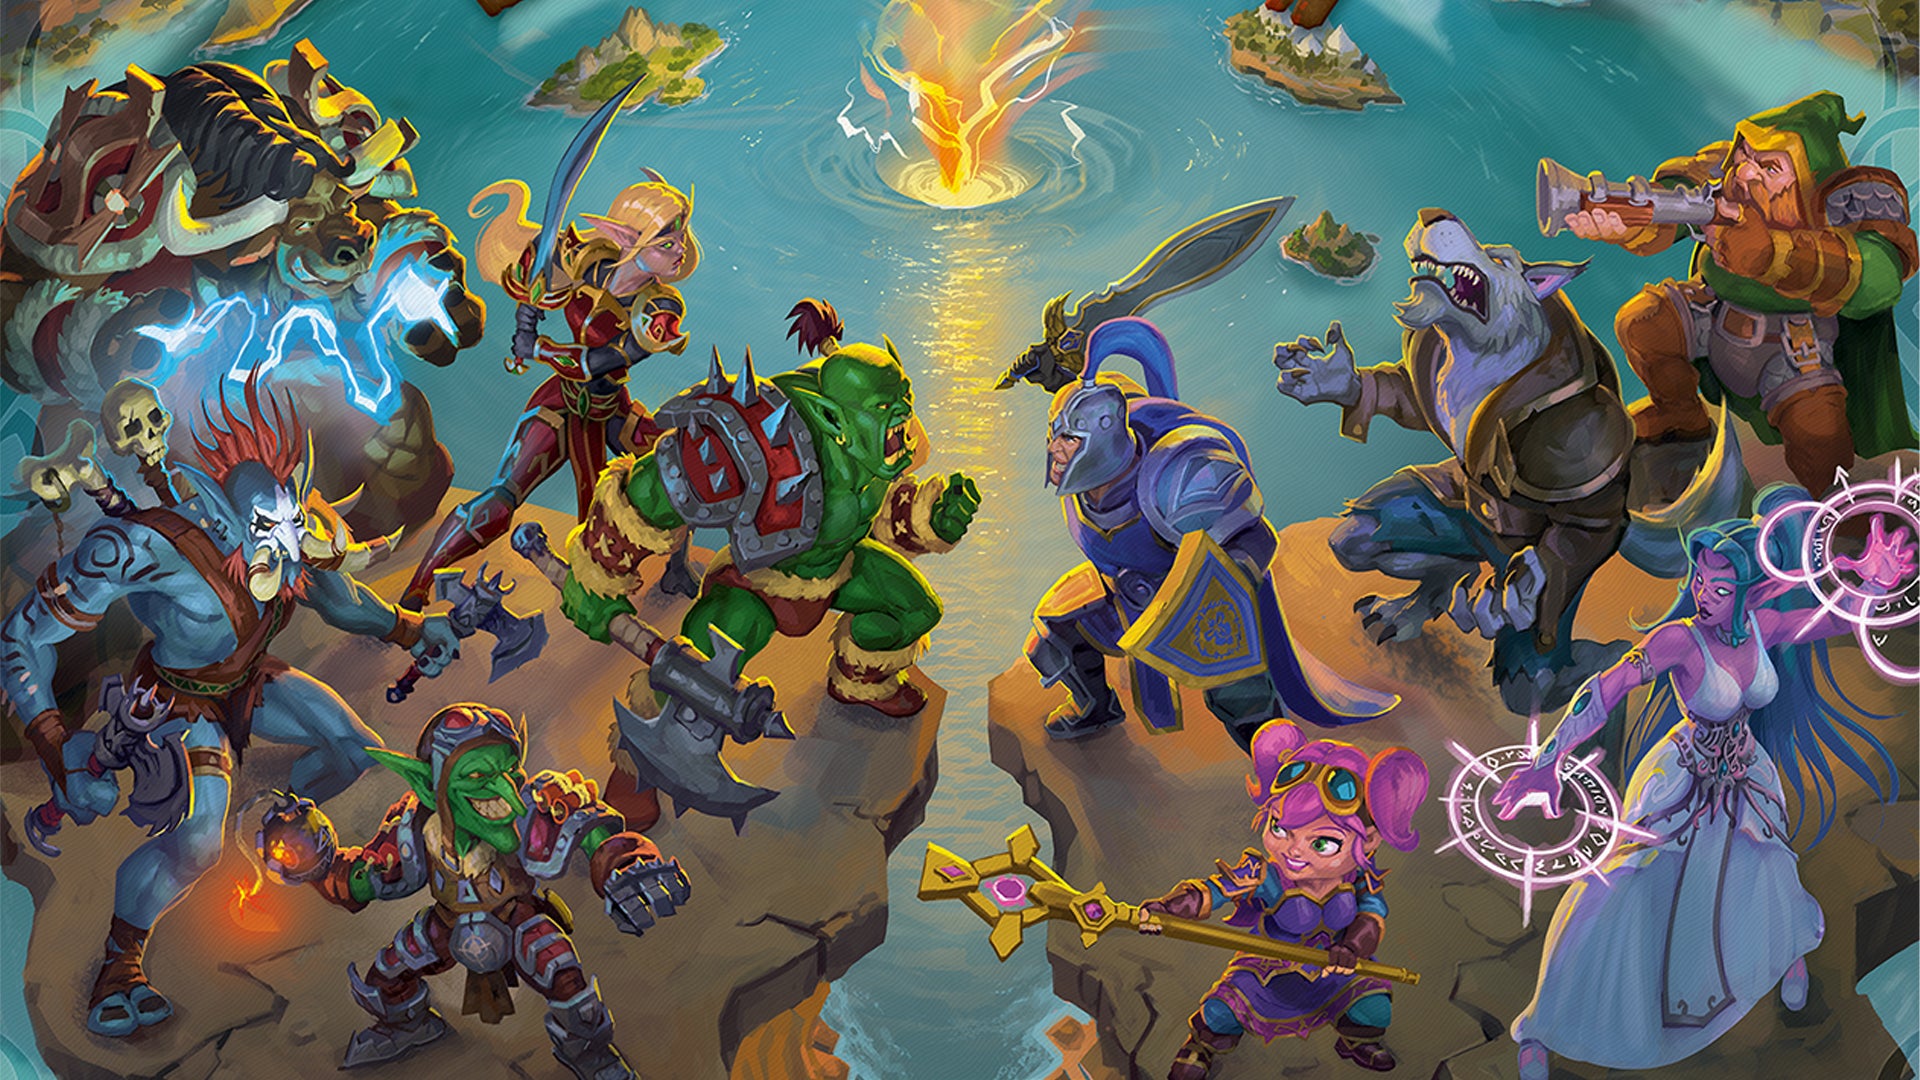 Small World of Warcraft board game brings the PC MMO back to the 